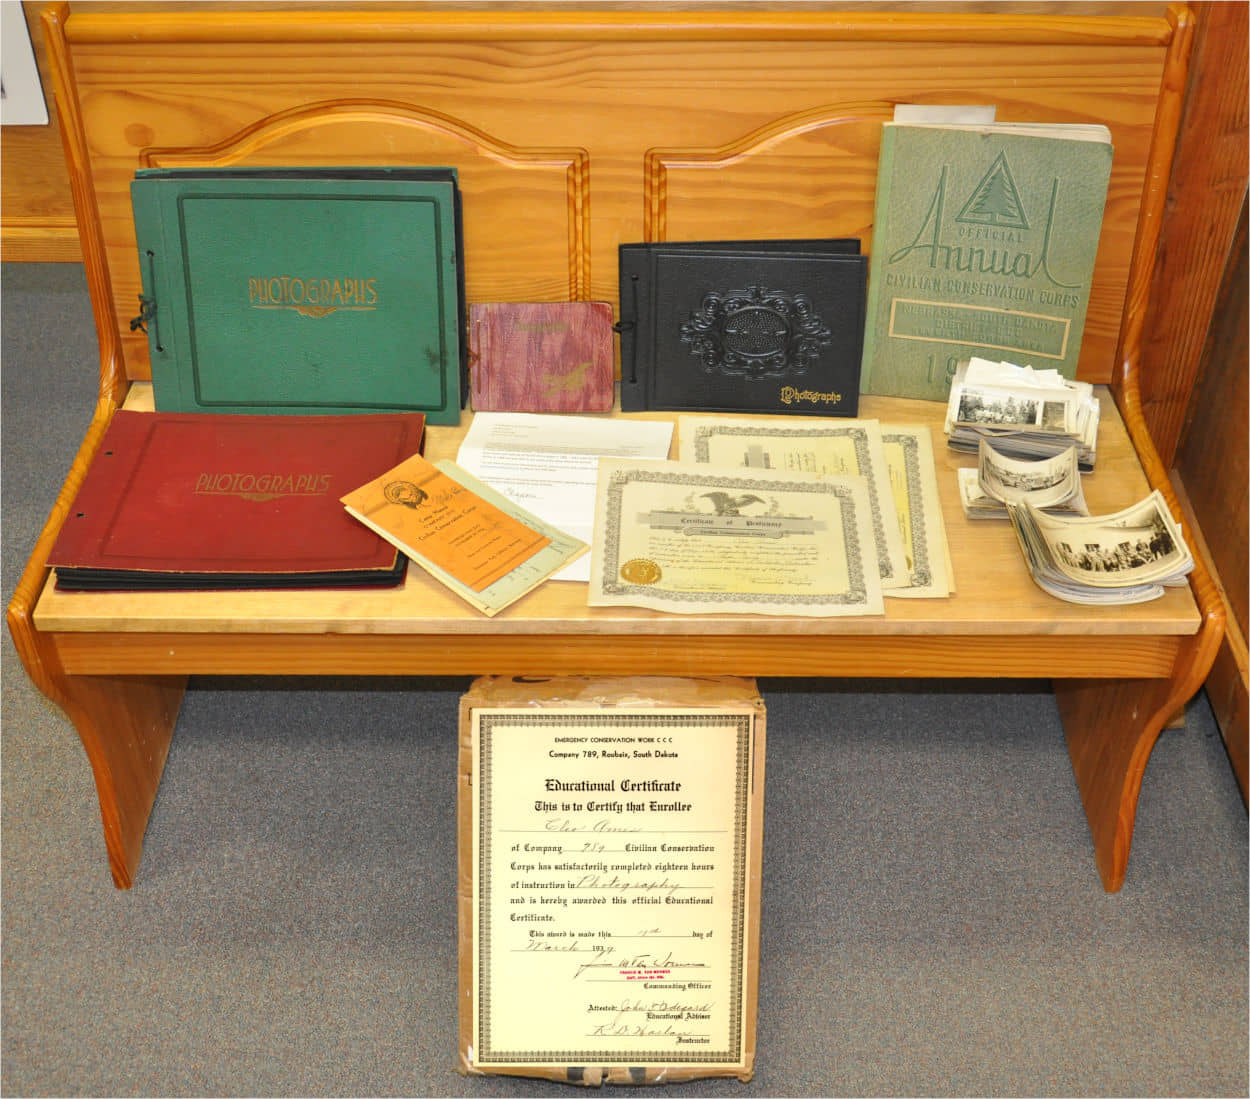 Cleo Ames donated CCC items